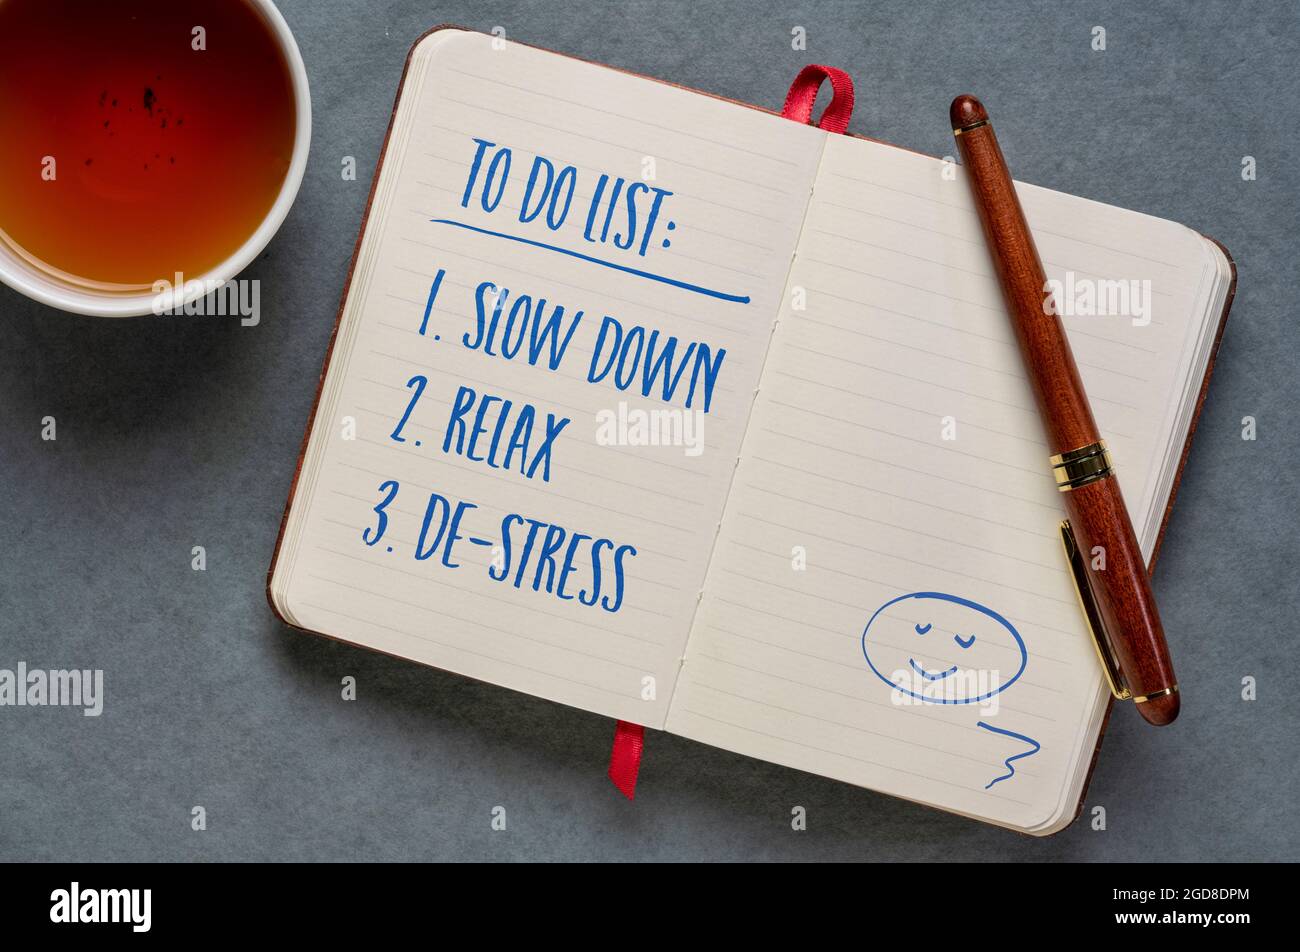 to do list - slow down, relax and de-stress, handwriting in a notebook or journal, journaling, lifestyle and personal development concept Stock Photo